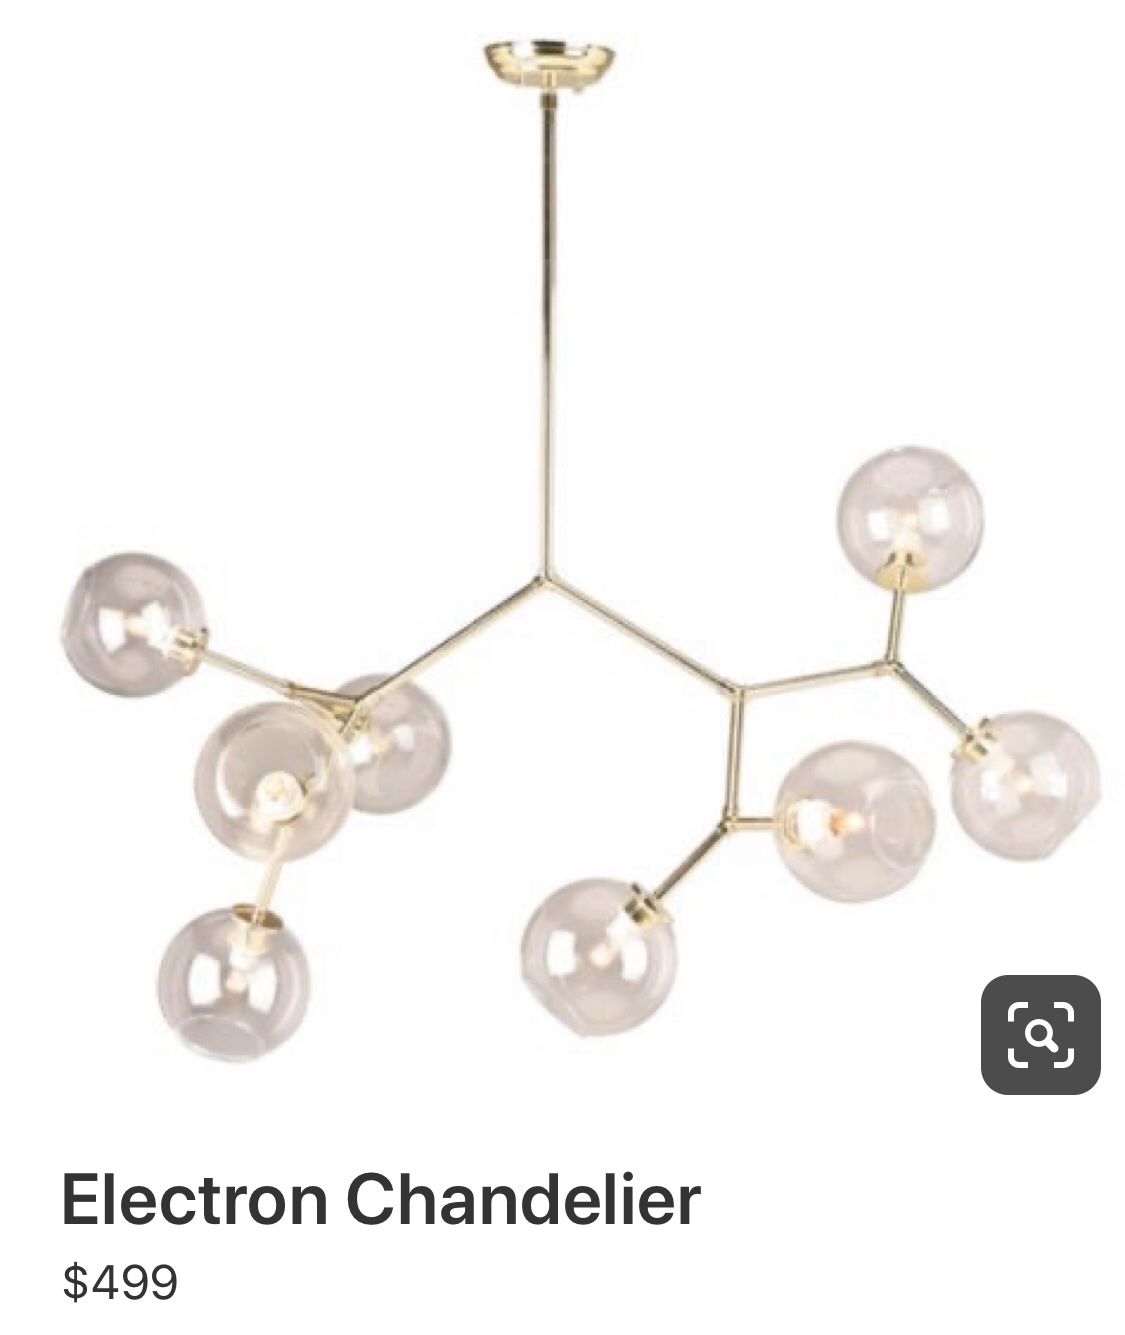 Electron Chandelier in gold